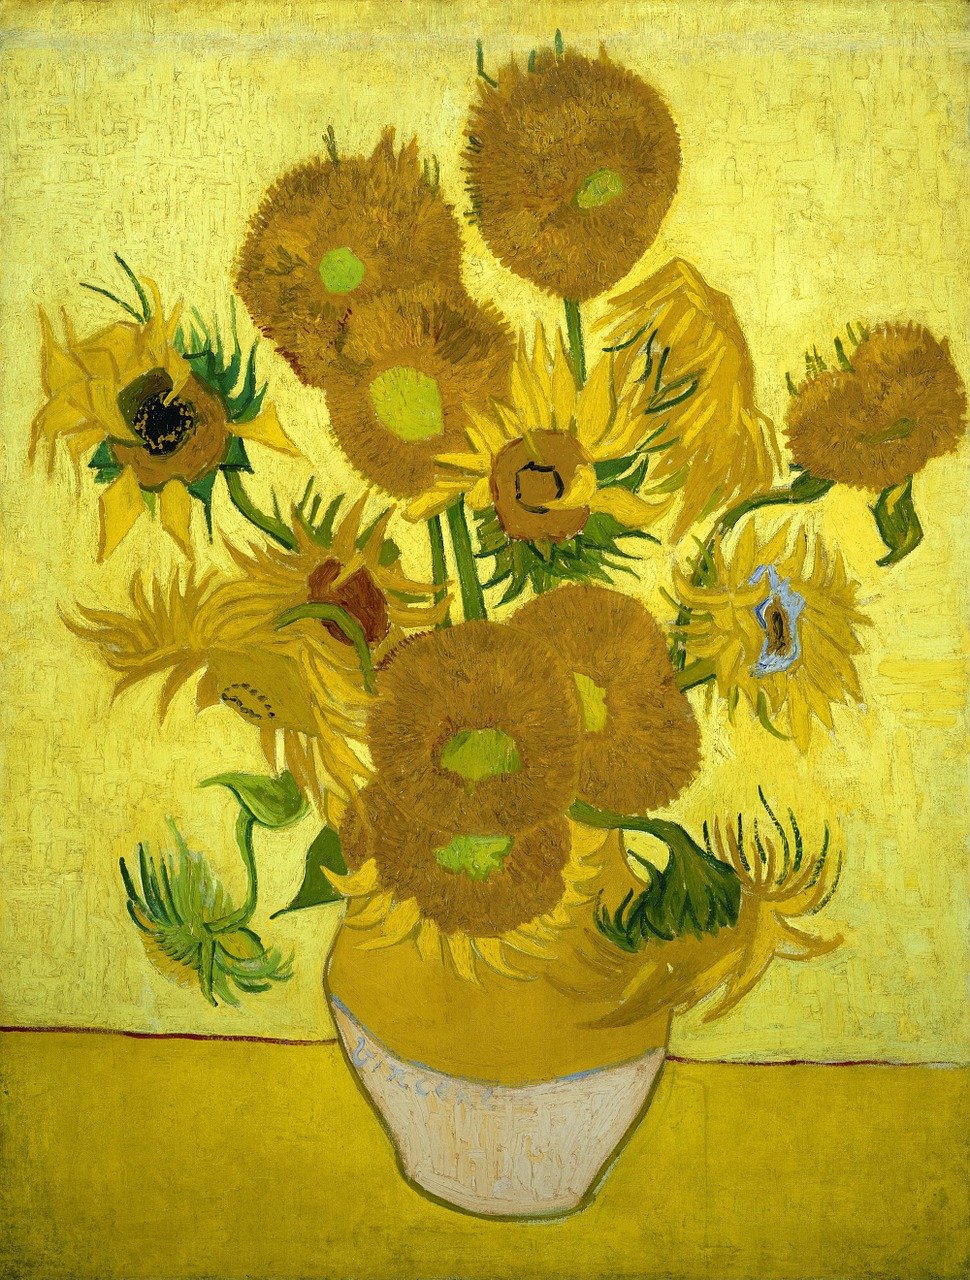 A painting from the Sunflowers series